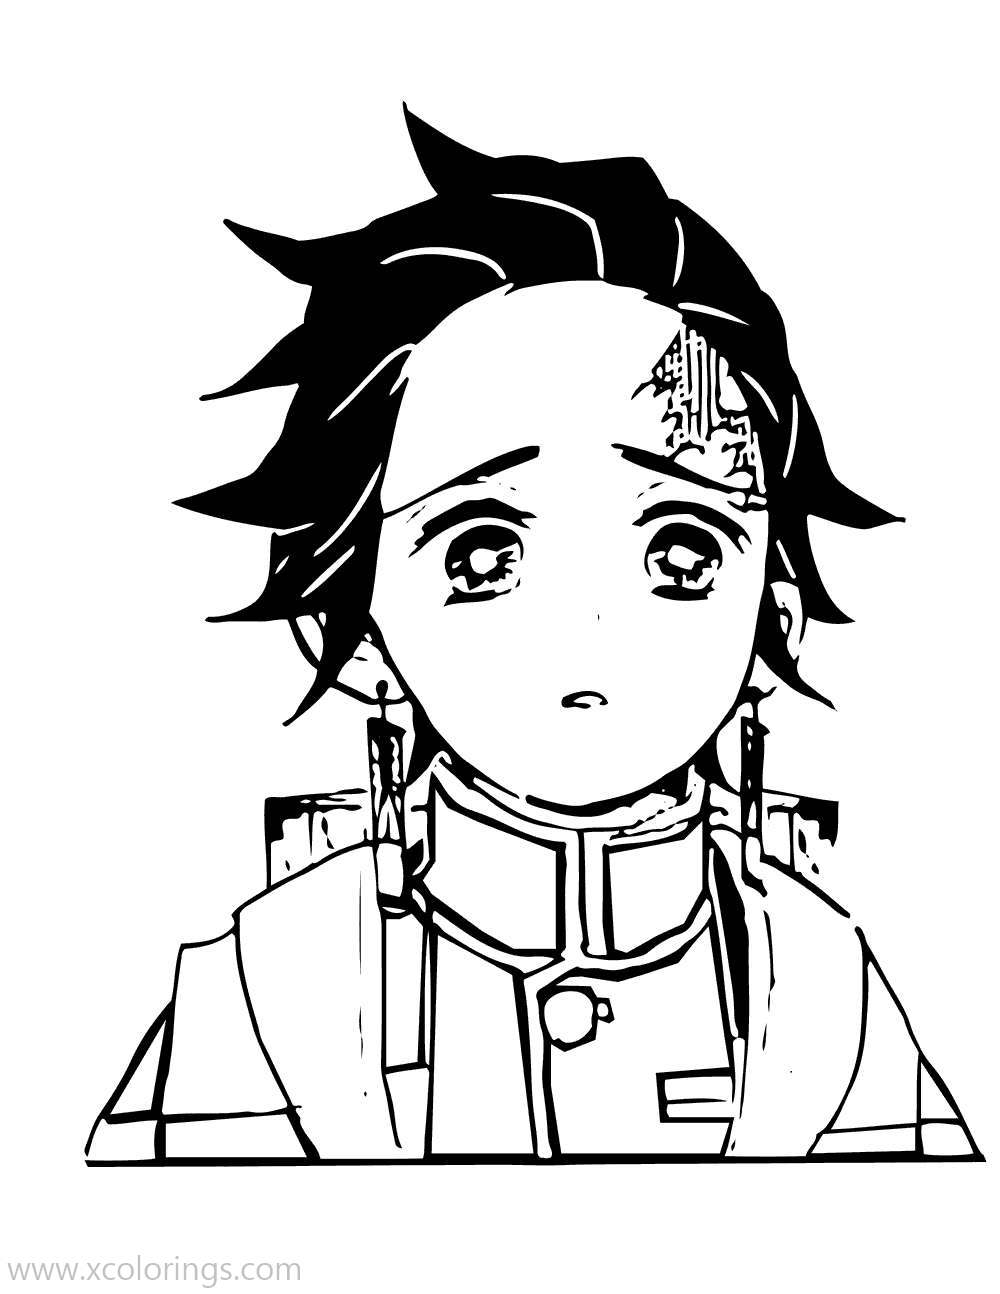 Free Demon Slayer Coloring Pages Tanjiro Kamado is not Happy printable